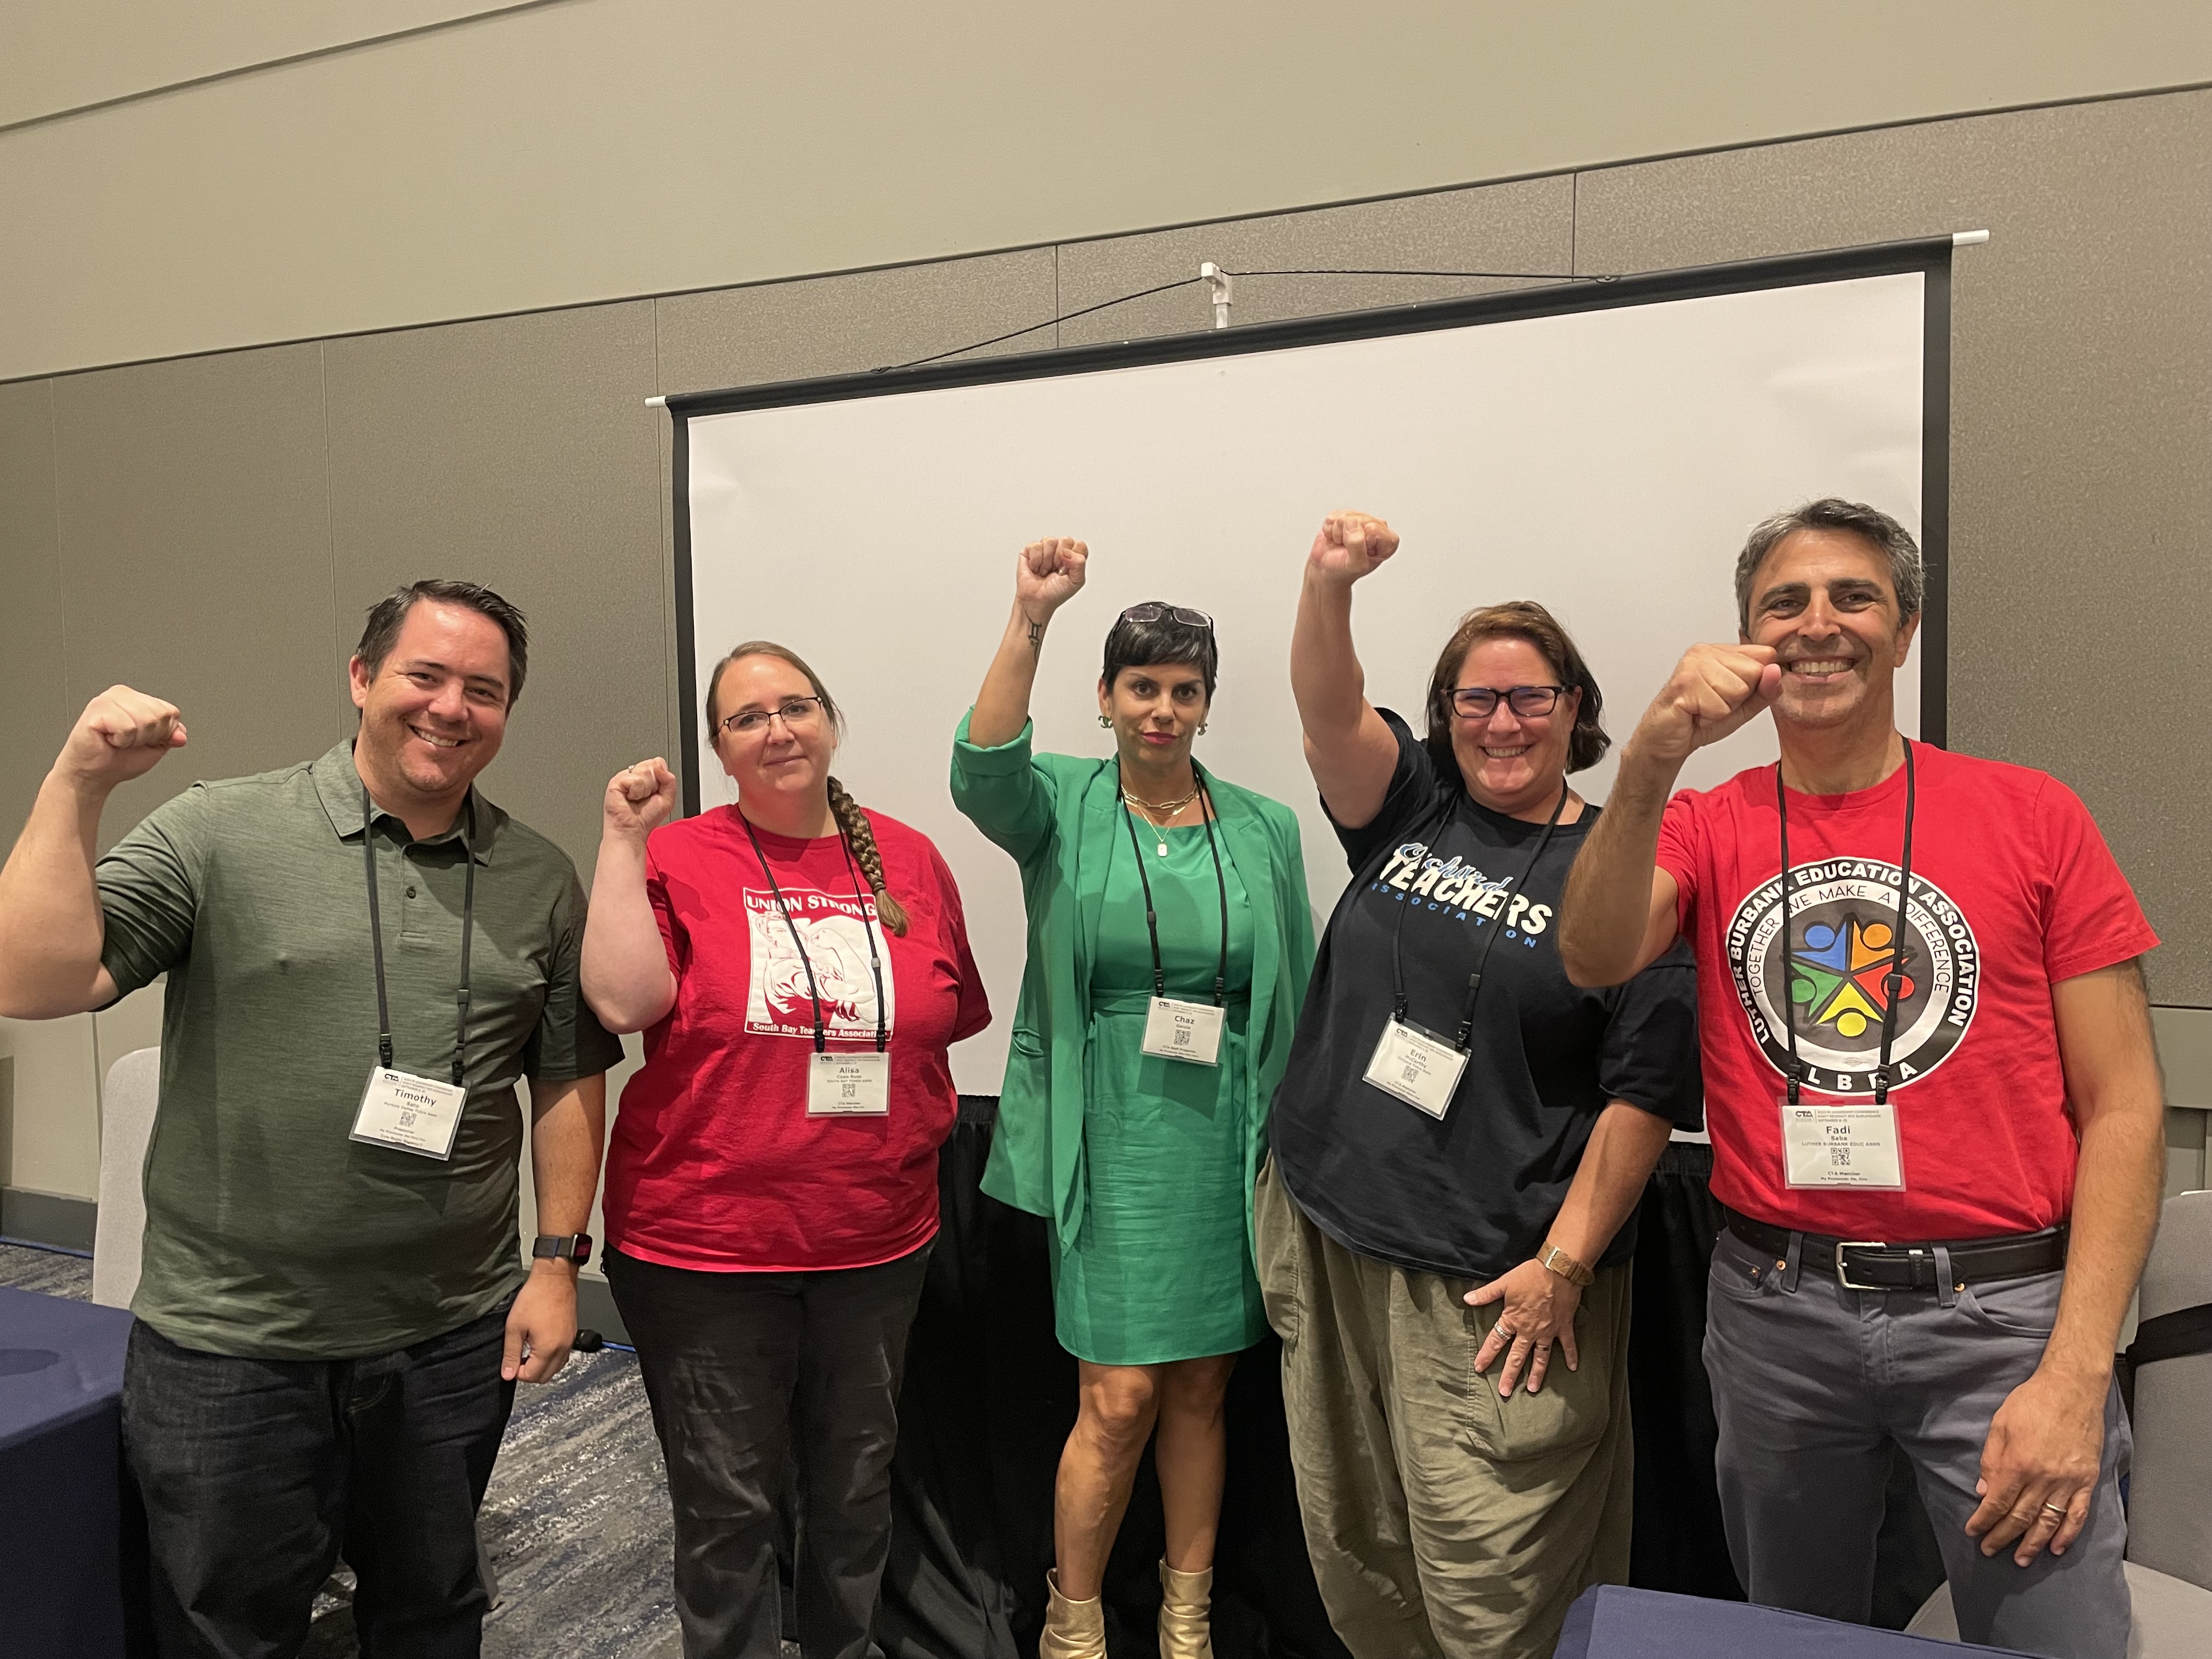 Panel: Small and Mighty Chapters - From left to right presenters: Timothy Sato (President, Portola Valley TA), Alisa Coan Ross (Bargaining Chair, South Bay TA), Chaz Garcia (CTA Staff), Eric McCarty (President, Orchard TA) and Fadi Saba (President, Luther Burbank TA)